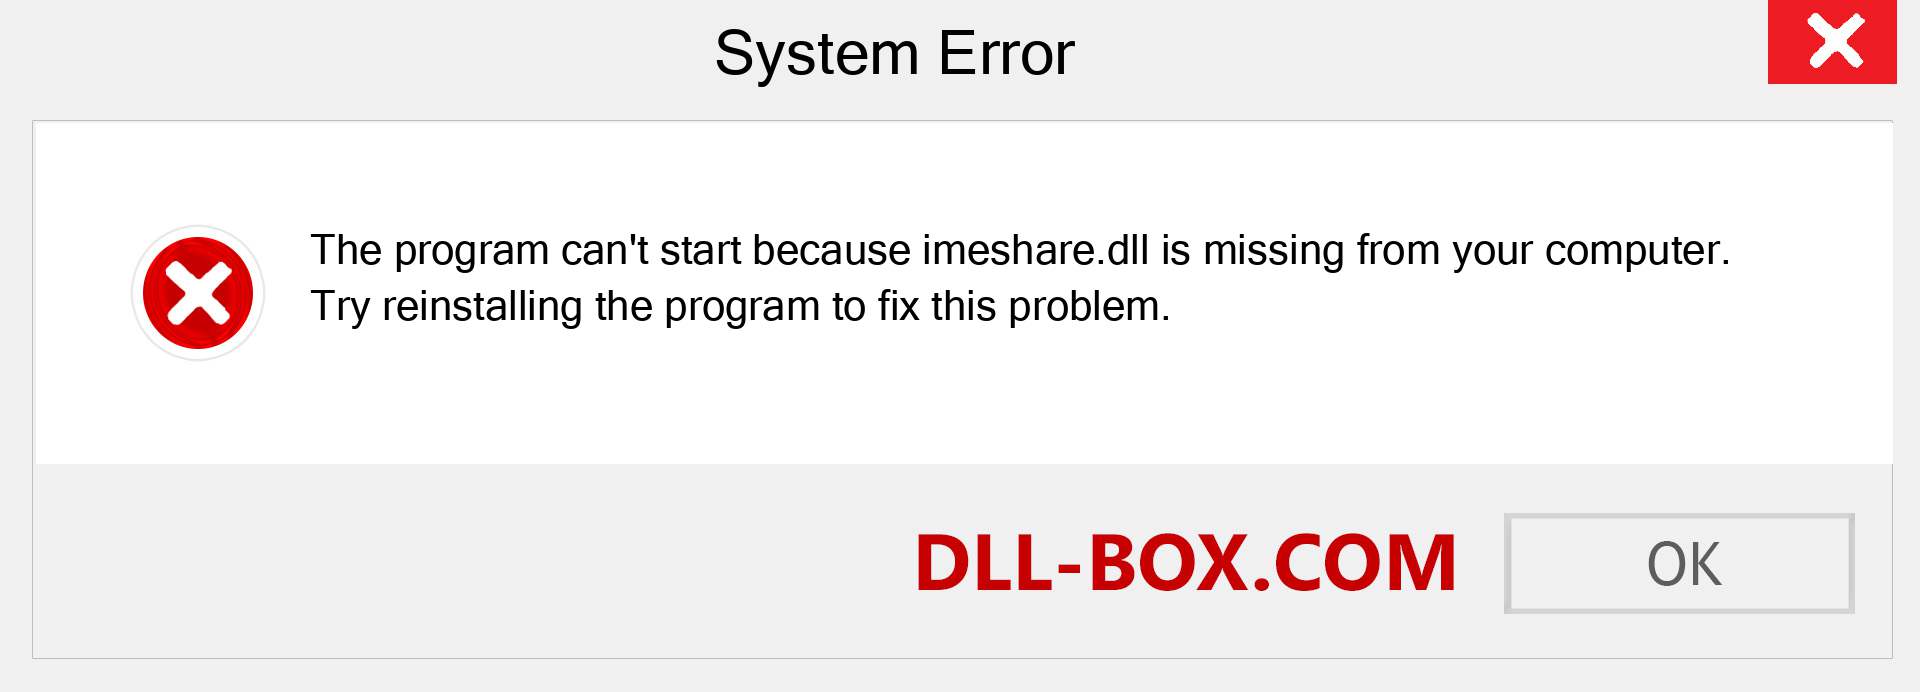  imeshare.dll file is missing?. Download for Windows 7, 8, 10 - Fix  imeshare dll Missing Error on Windows, photos, images